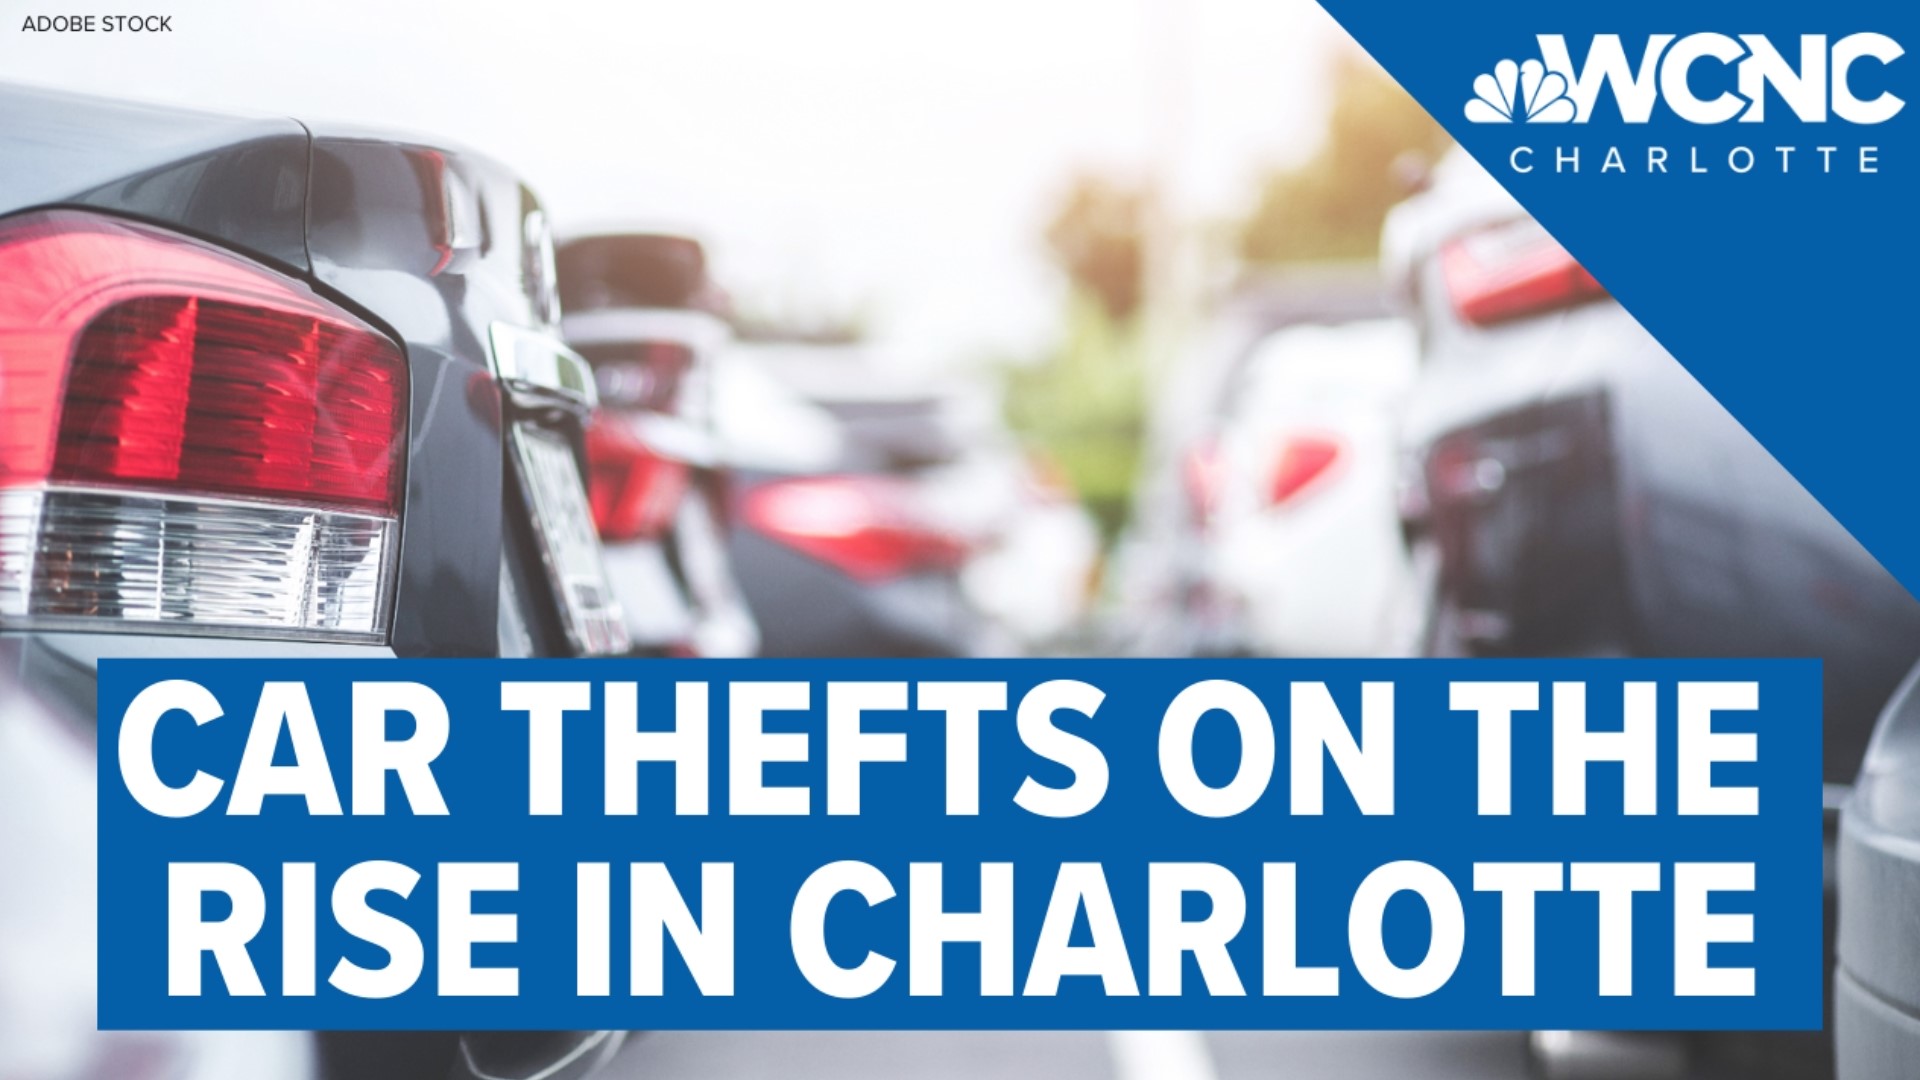 CMPD said the department has investigated more than 700 vehicle thefts so far in 2022. That's up 11% from the same time last year.